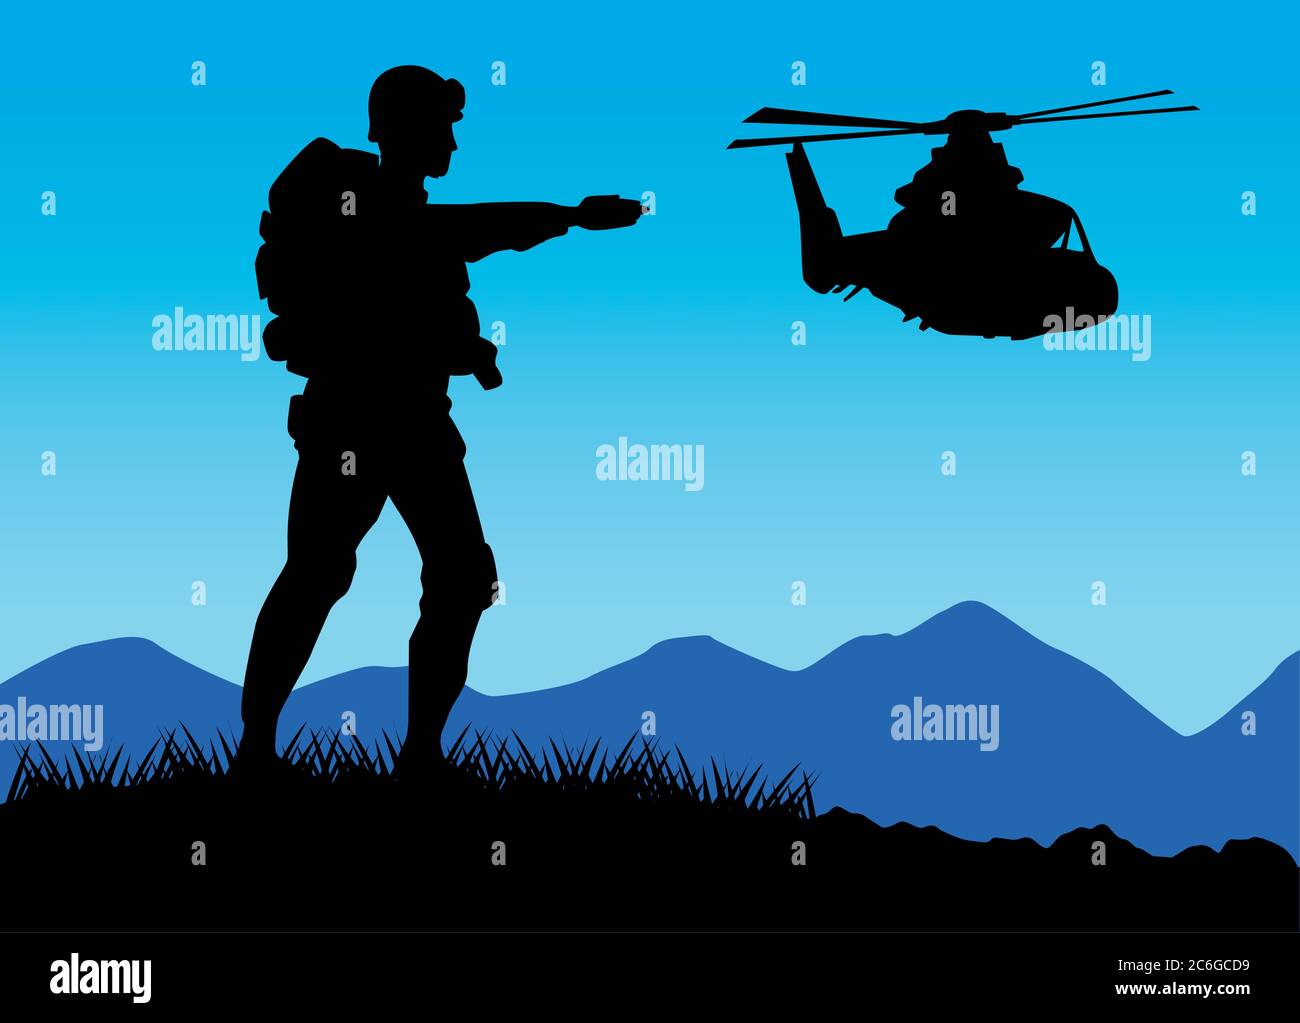 military soldier silhouette figure with helicopter vector illustration design Stock Vector